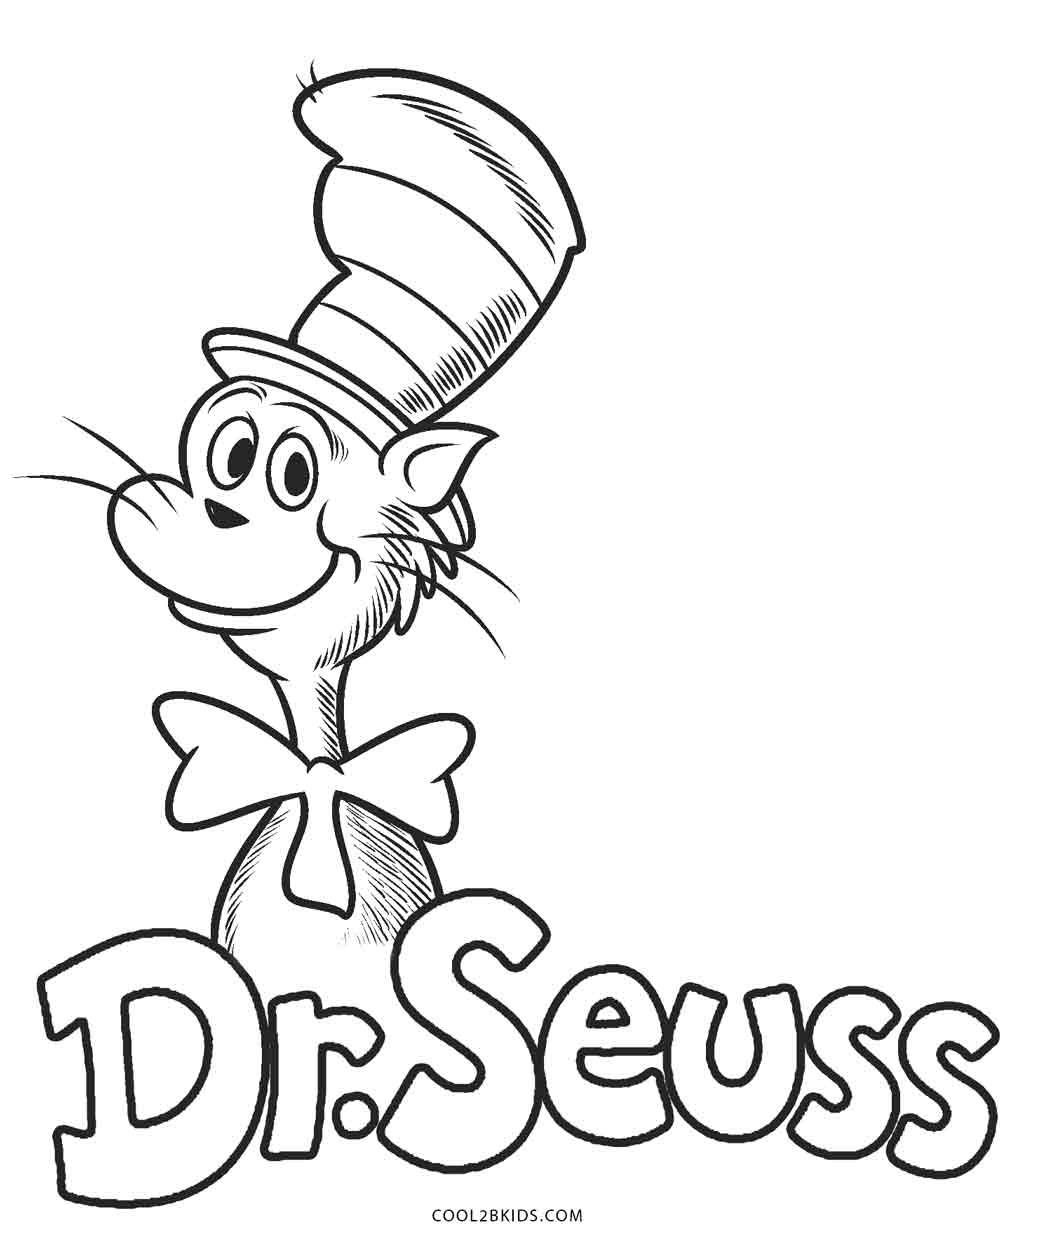 Dr Seuss Coloring Pages Printable
 Free Printable Dr Seuss Coloring Pages For Kids